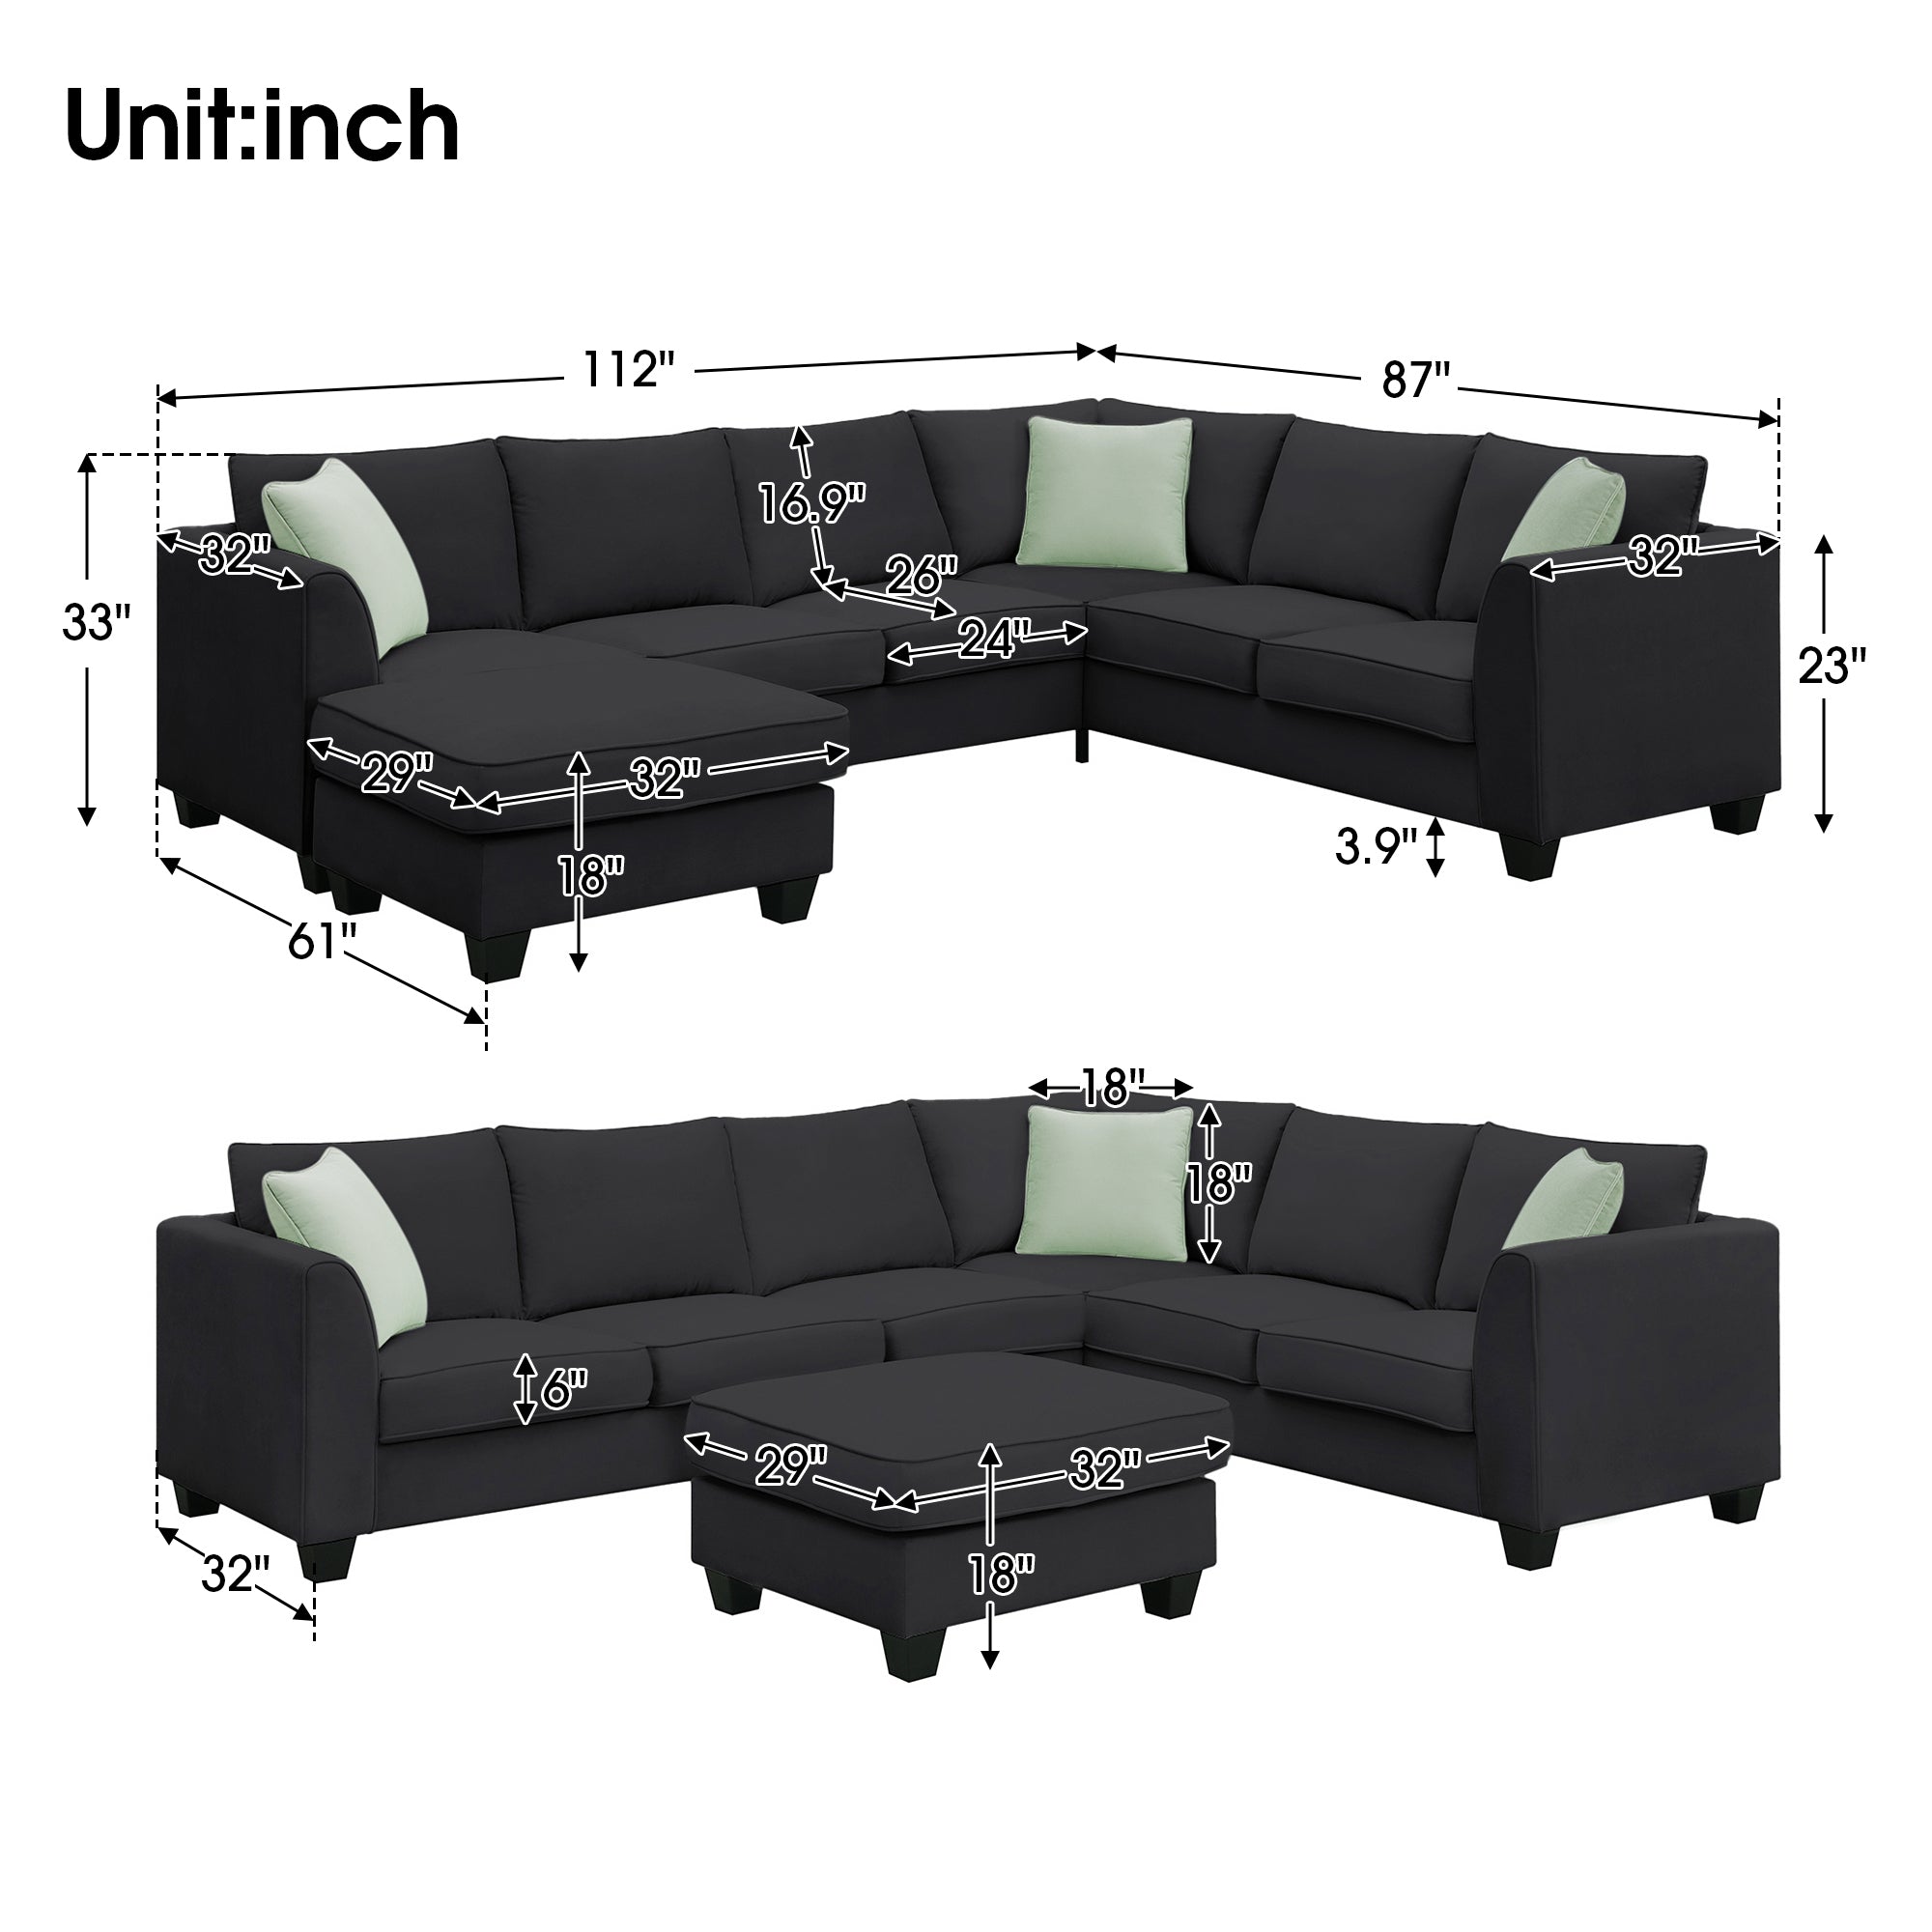 [VIDEO provided] 112*87" Sectional Sofa Couches Living Room Sets 7 Seats Modular Sectional Sofa with Ottoman L Shape Fabric Sofa Corner Couch Set with 3 Pillows, Black